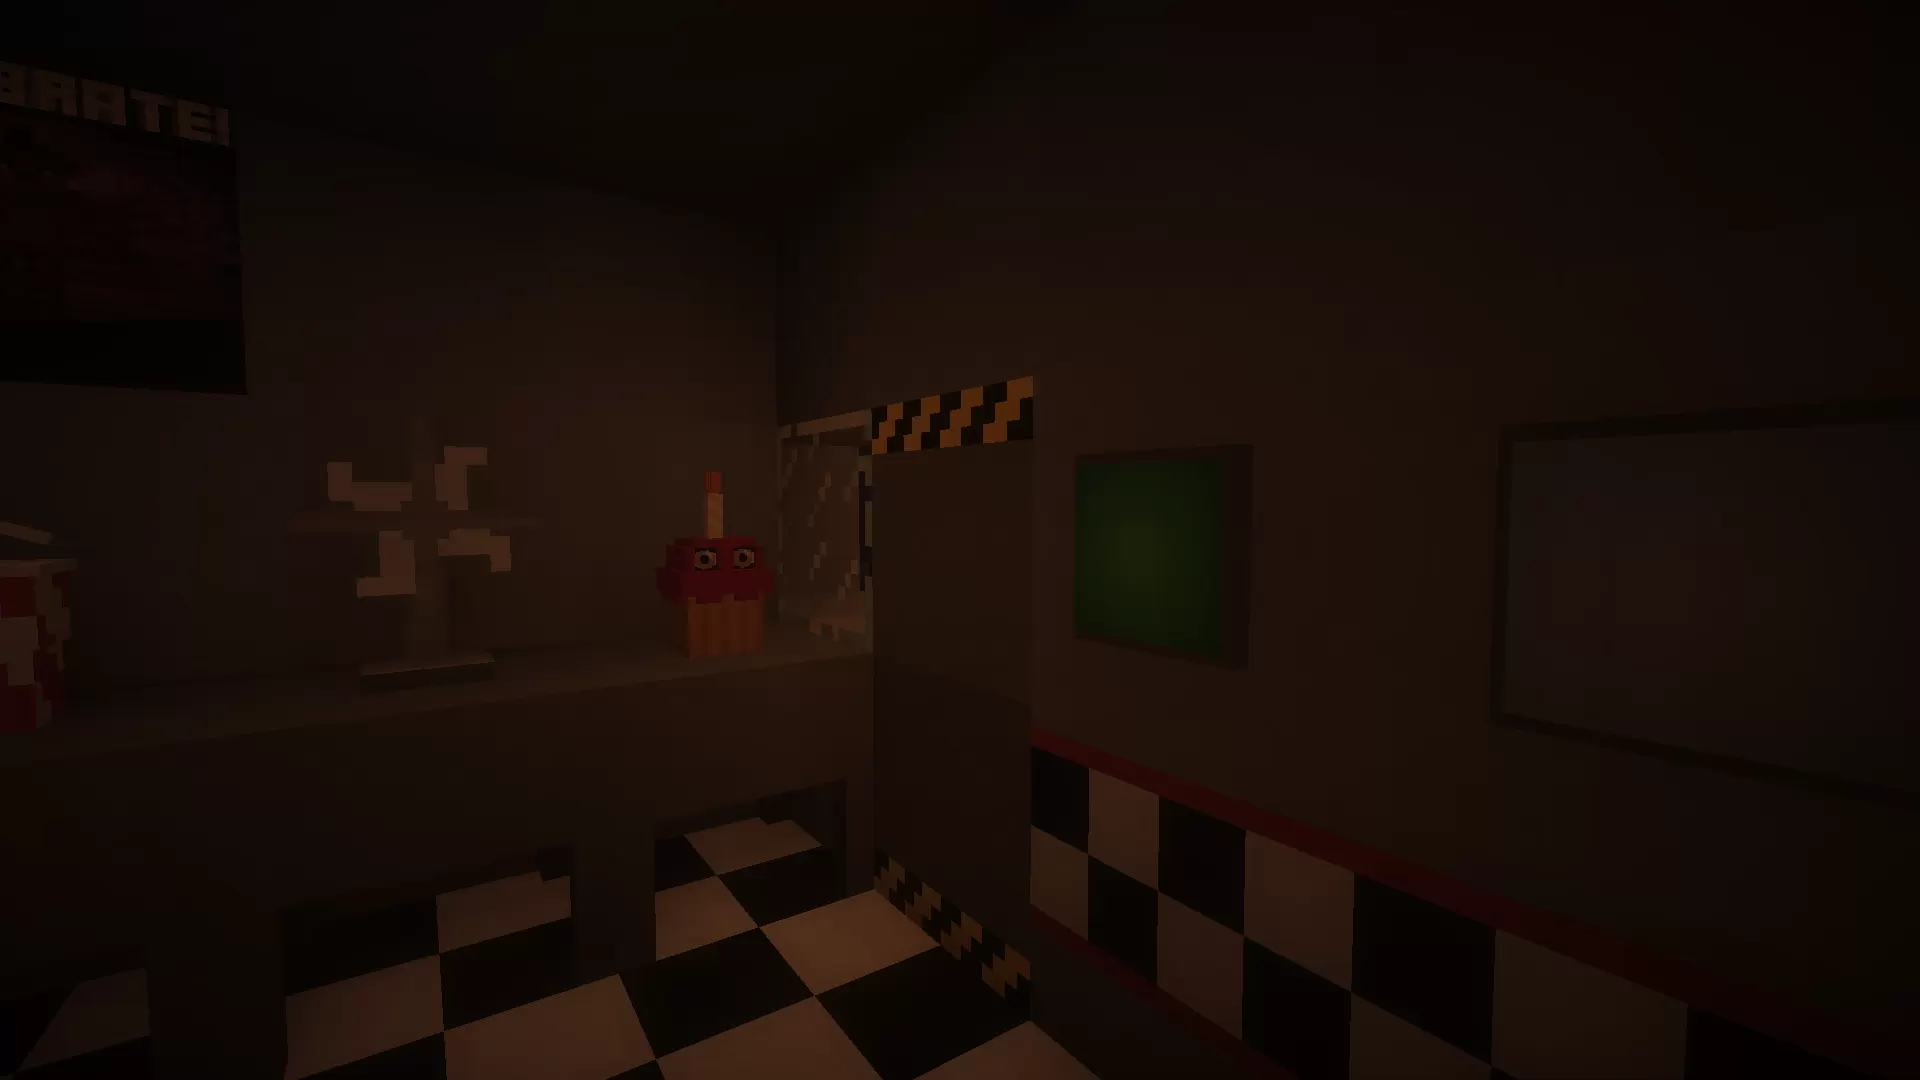 Five Nights at Freddy's Map! - Maps - Mapping and Modding: Java Edition -  Minecraft Forum - Minecraft Forum